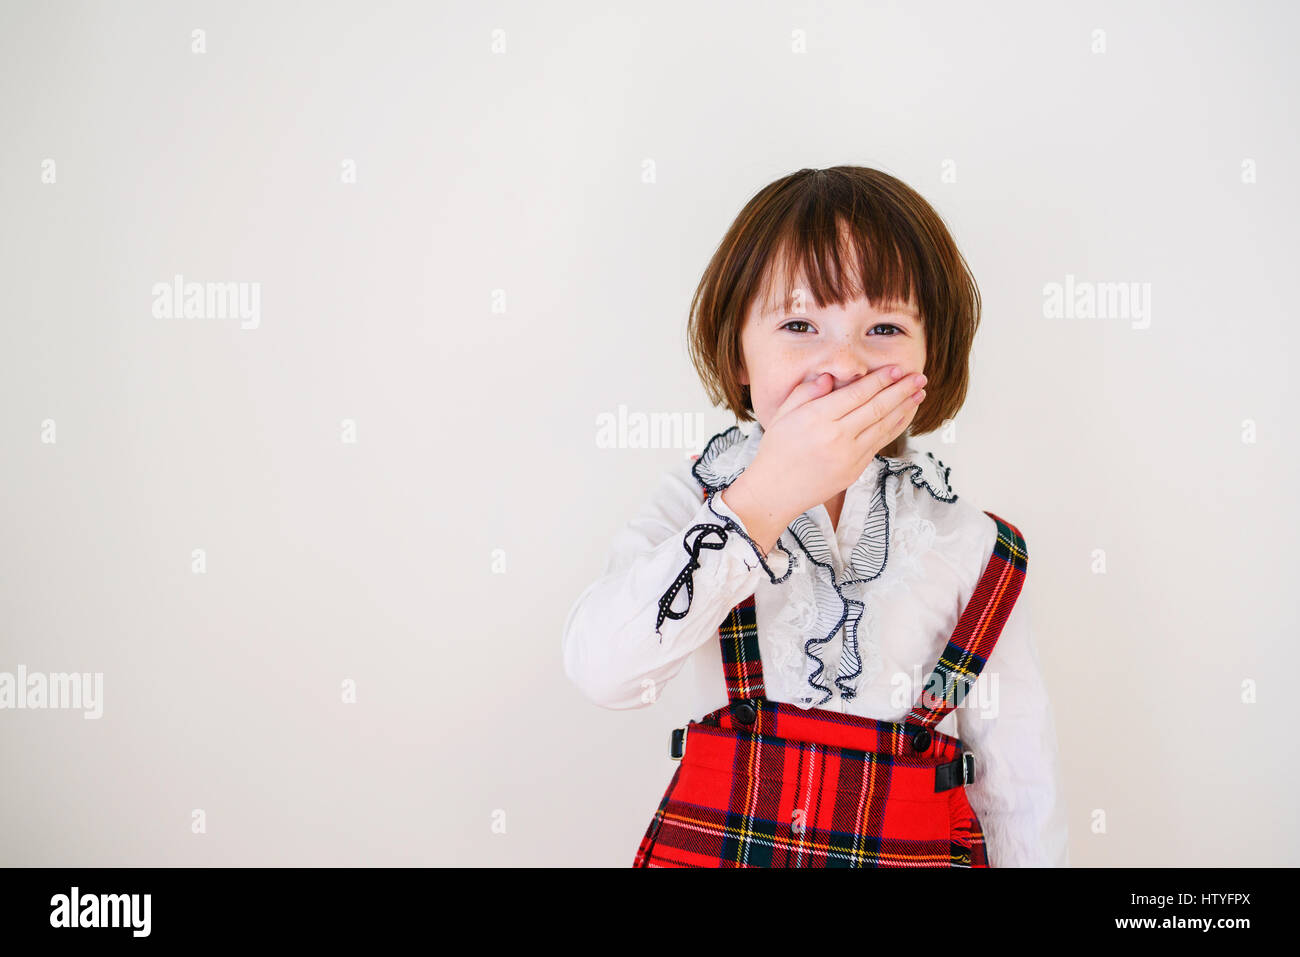 Portrait of a girl giggling with her hand over her mouth Stock Photo